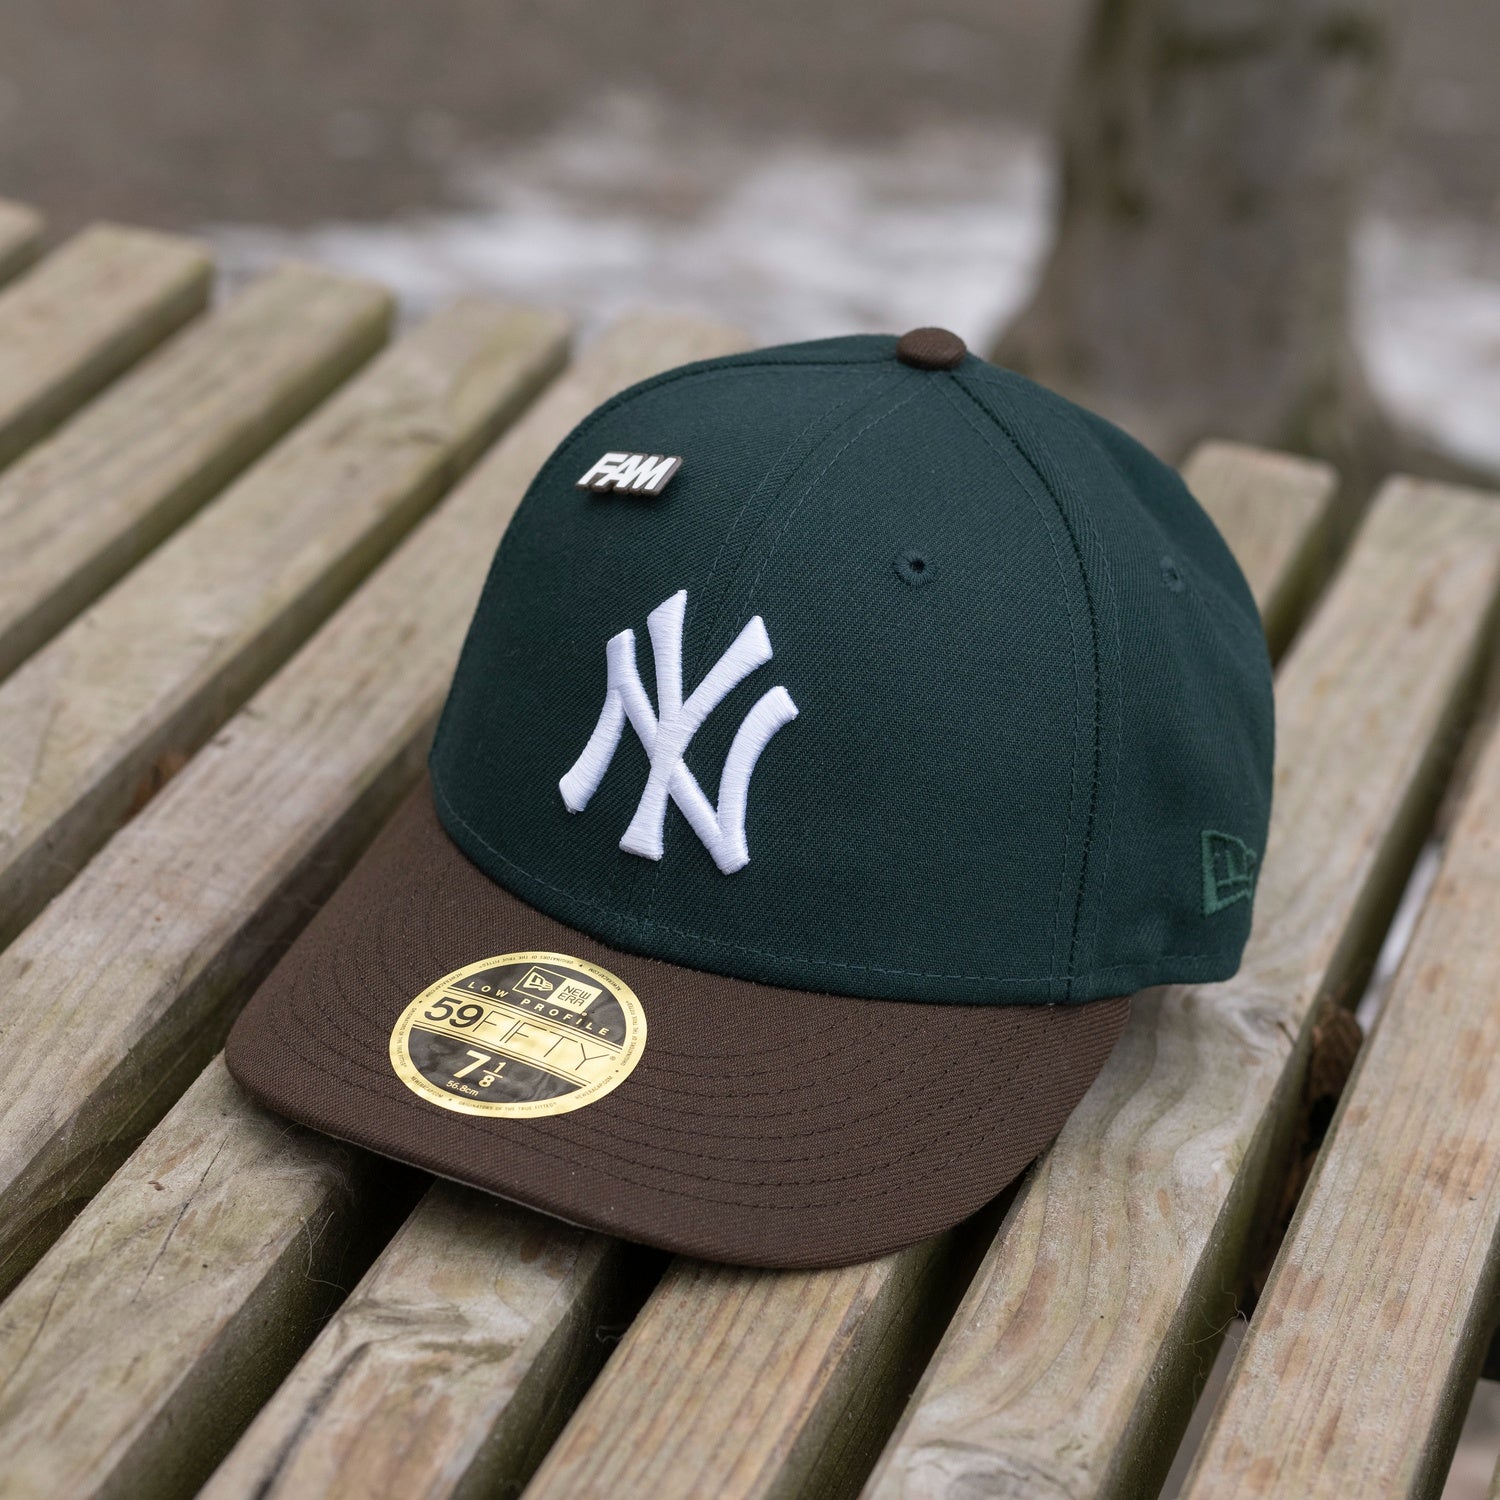 NEW ERA 59FIFTY LOW PROFILE MLB NEW YORK YANKEES TWO TONE / GREY UV FITTED CAP